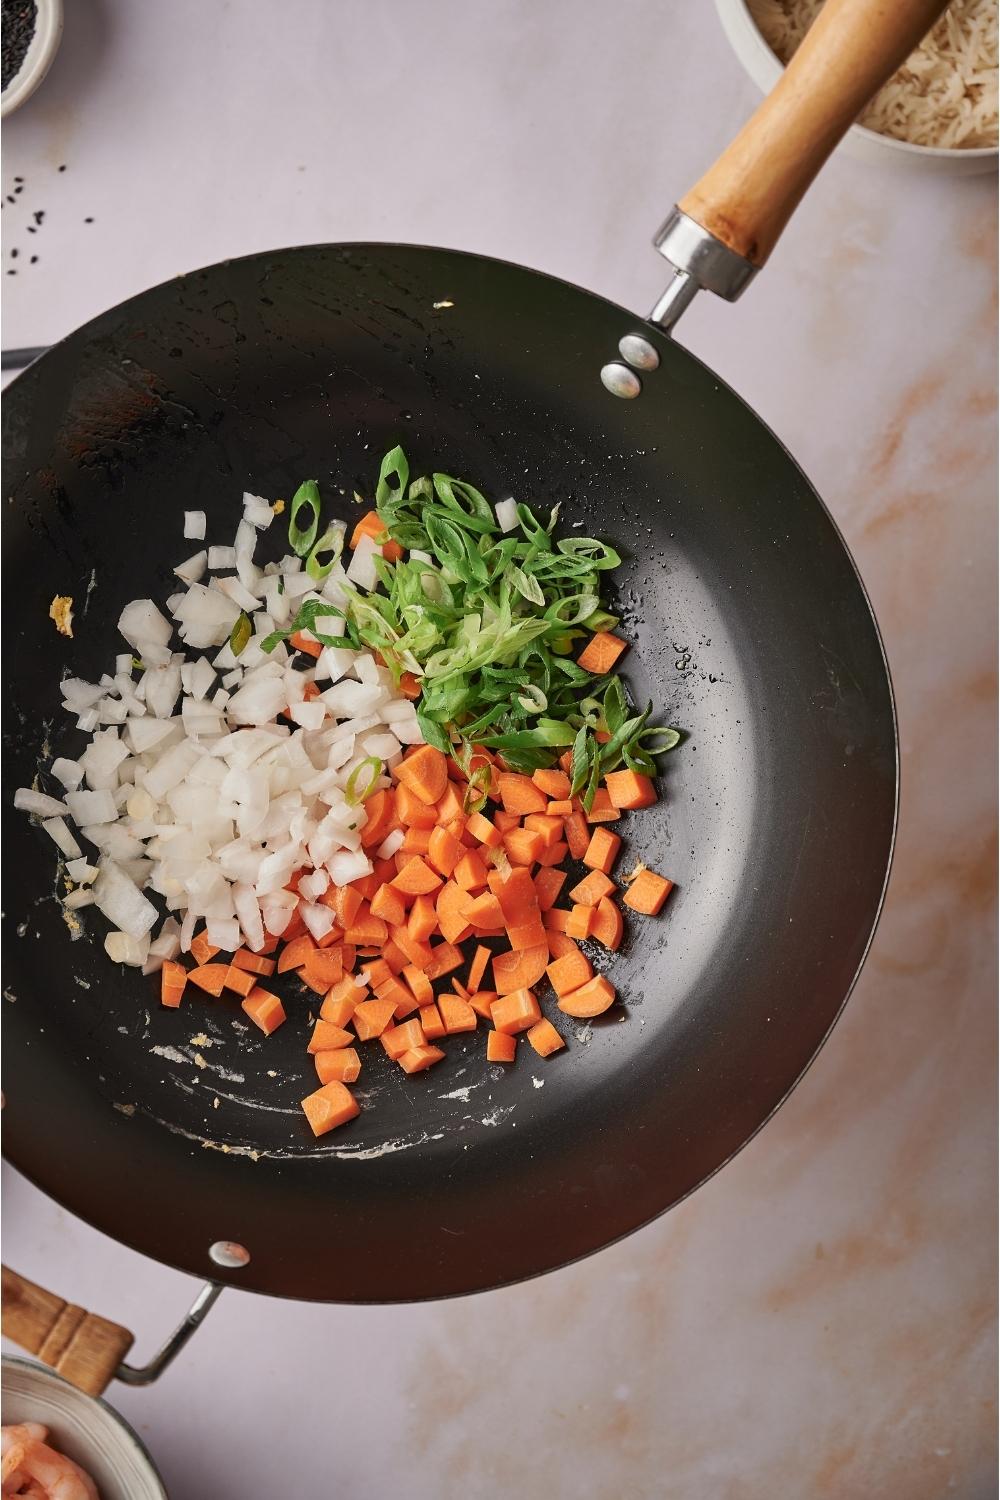 A wok on a grey counter with green onion, carrot, and white onion freshly added.